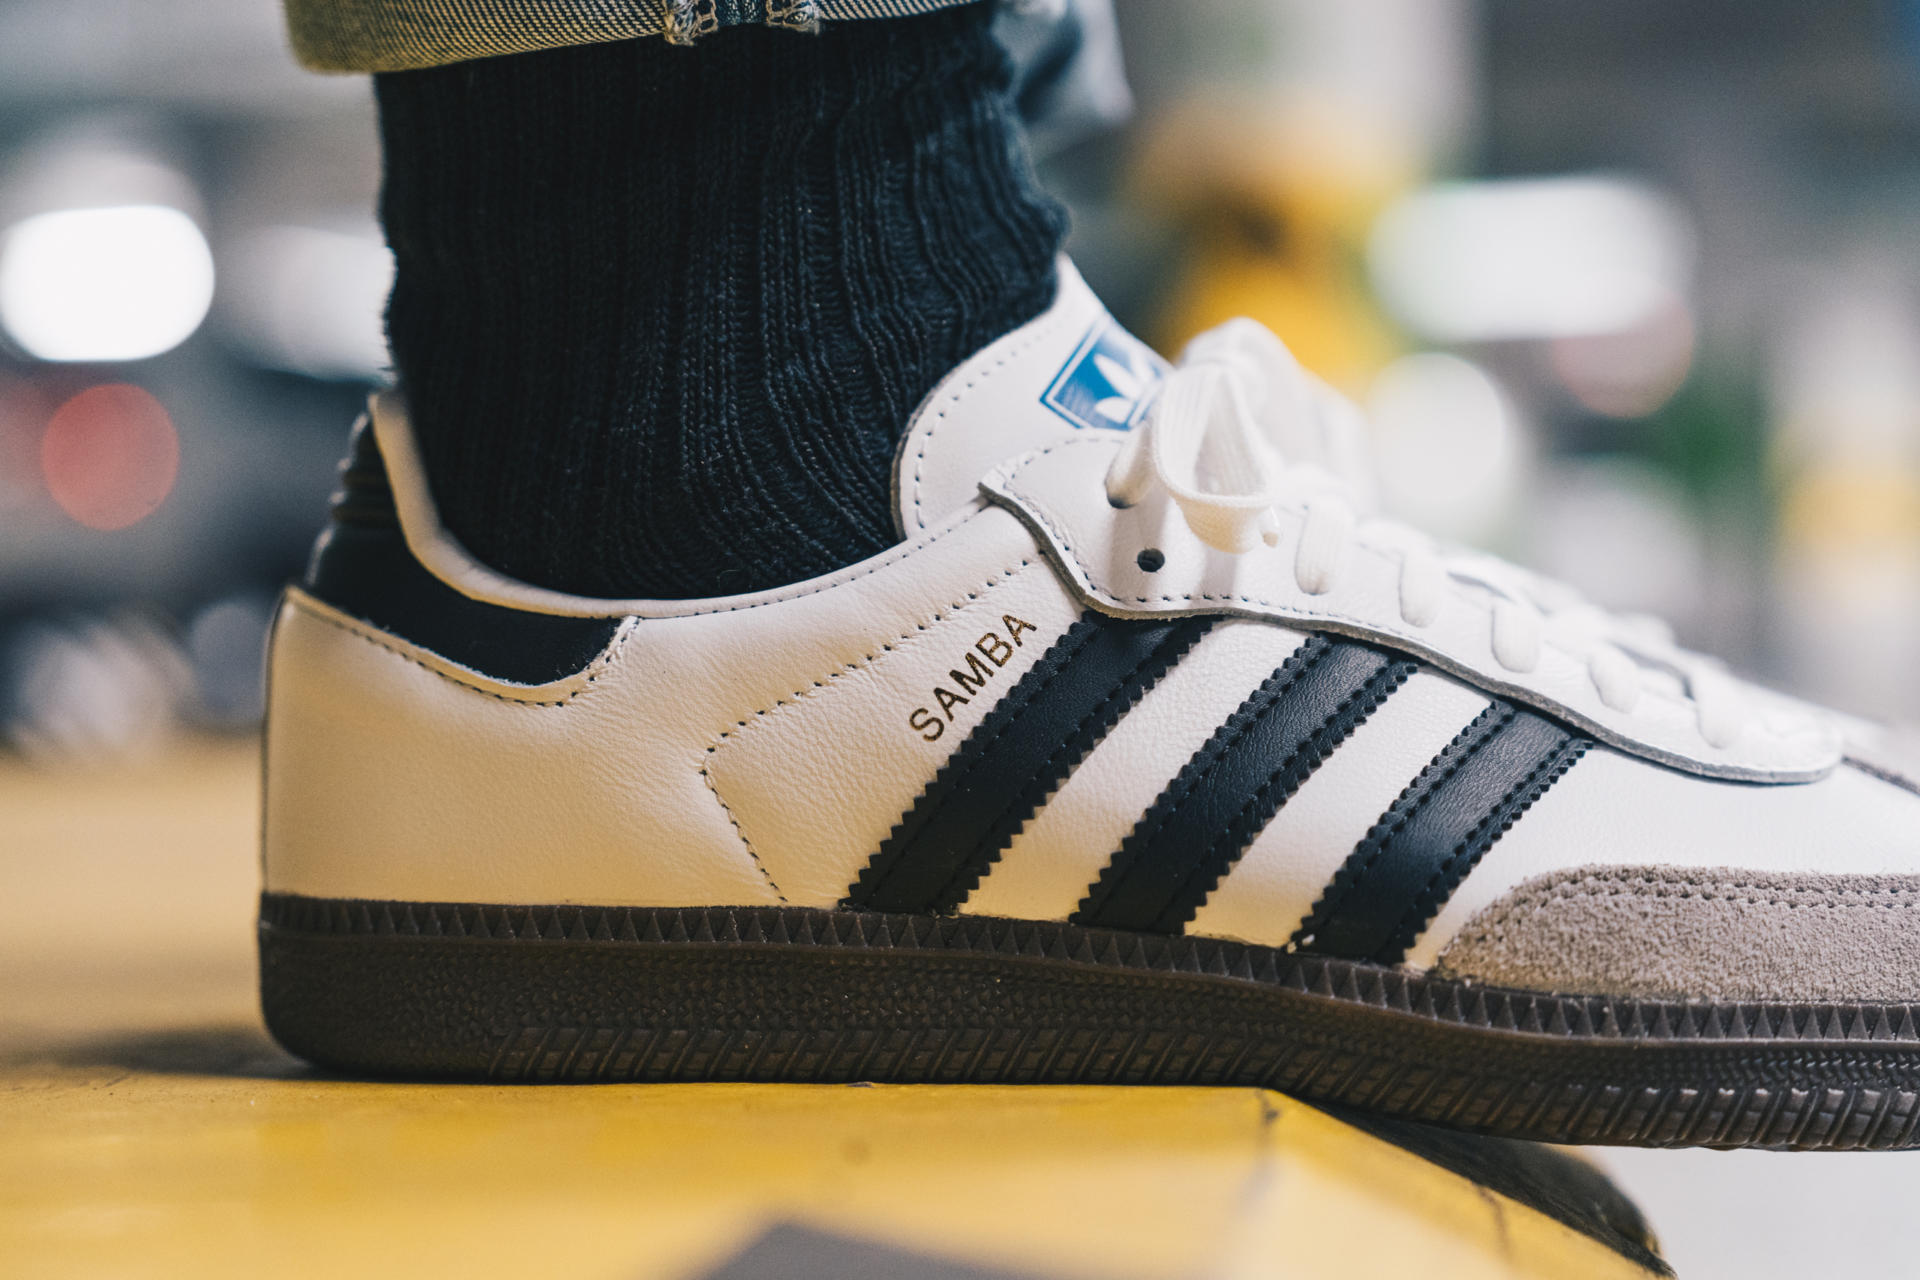 Retro adidas Sneaker Trends to Wear This Year - Blog posts